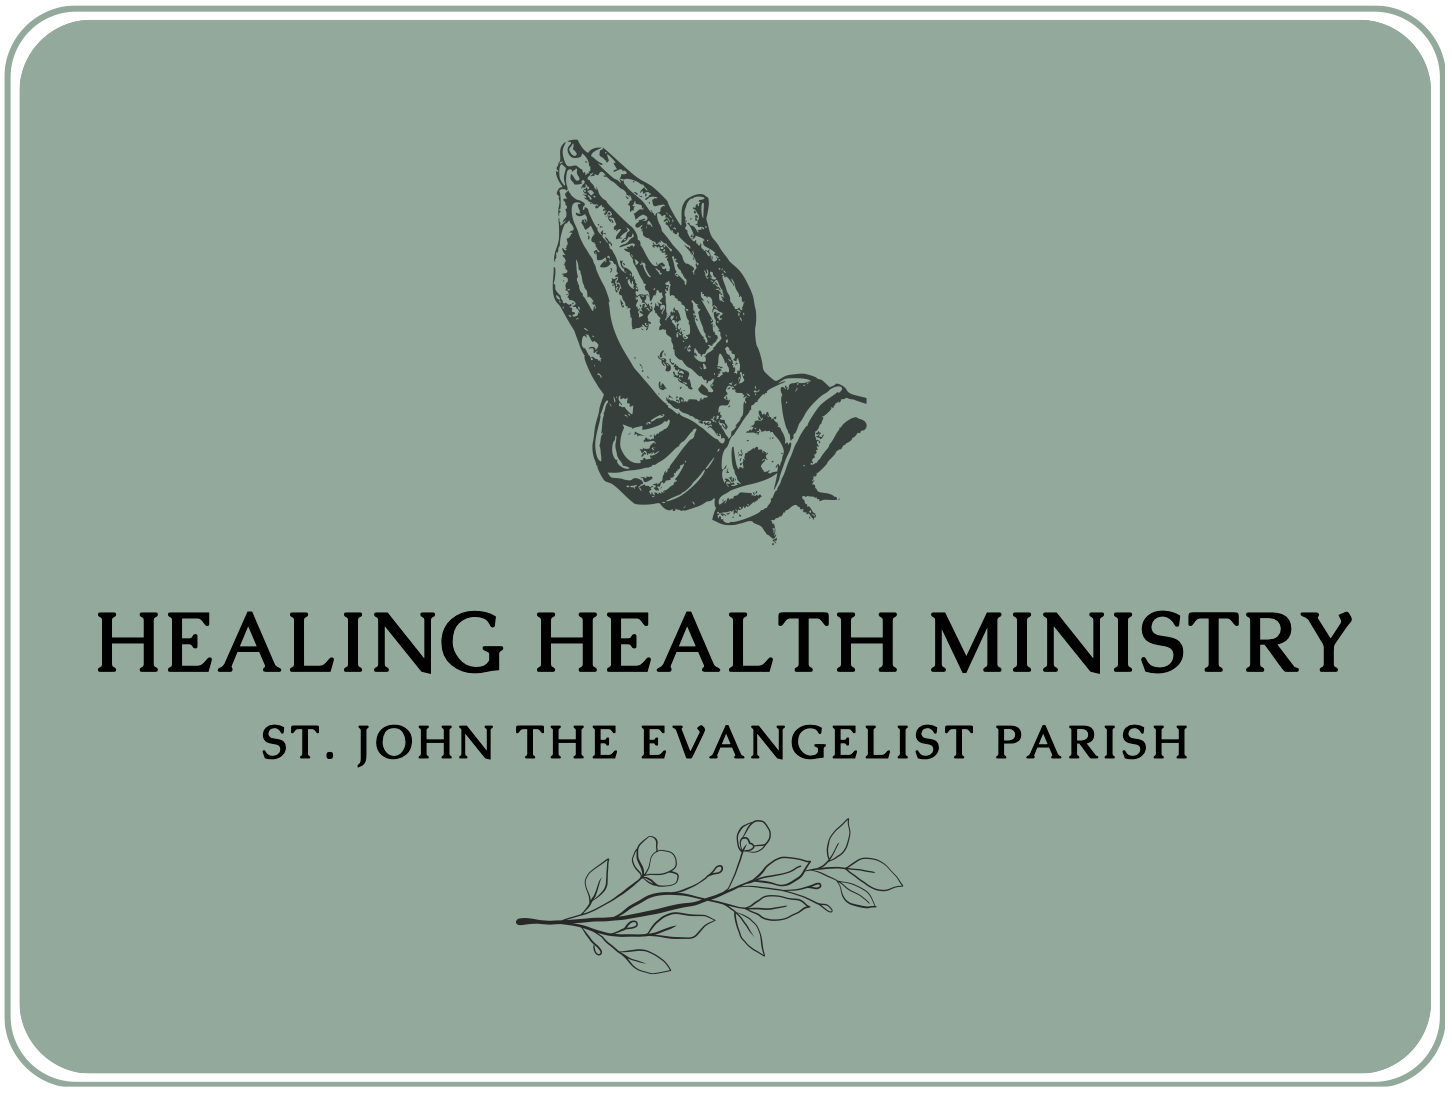 Praying hands on a green backgroup over the title Healing Health Ministry, St. John the Evangelist Parish